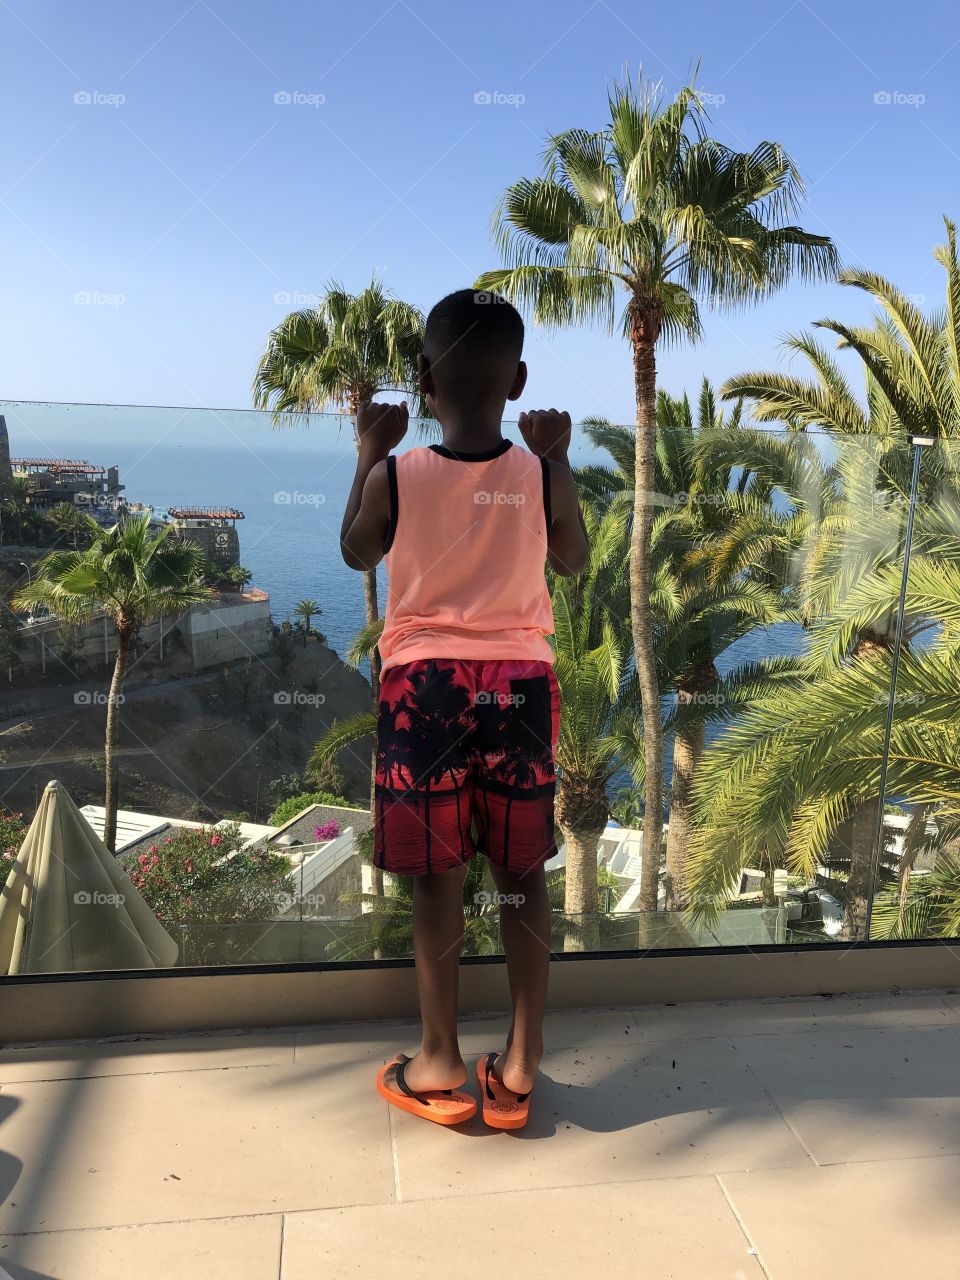 My son amazed by the view on holiday 